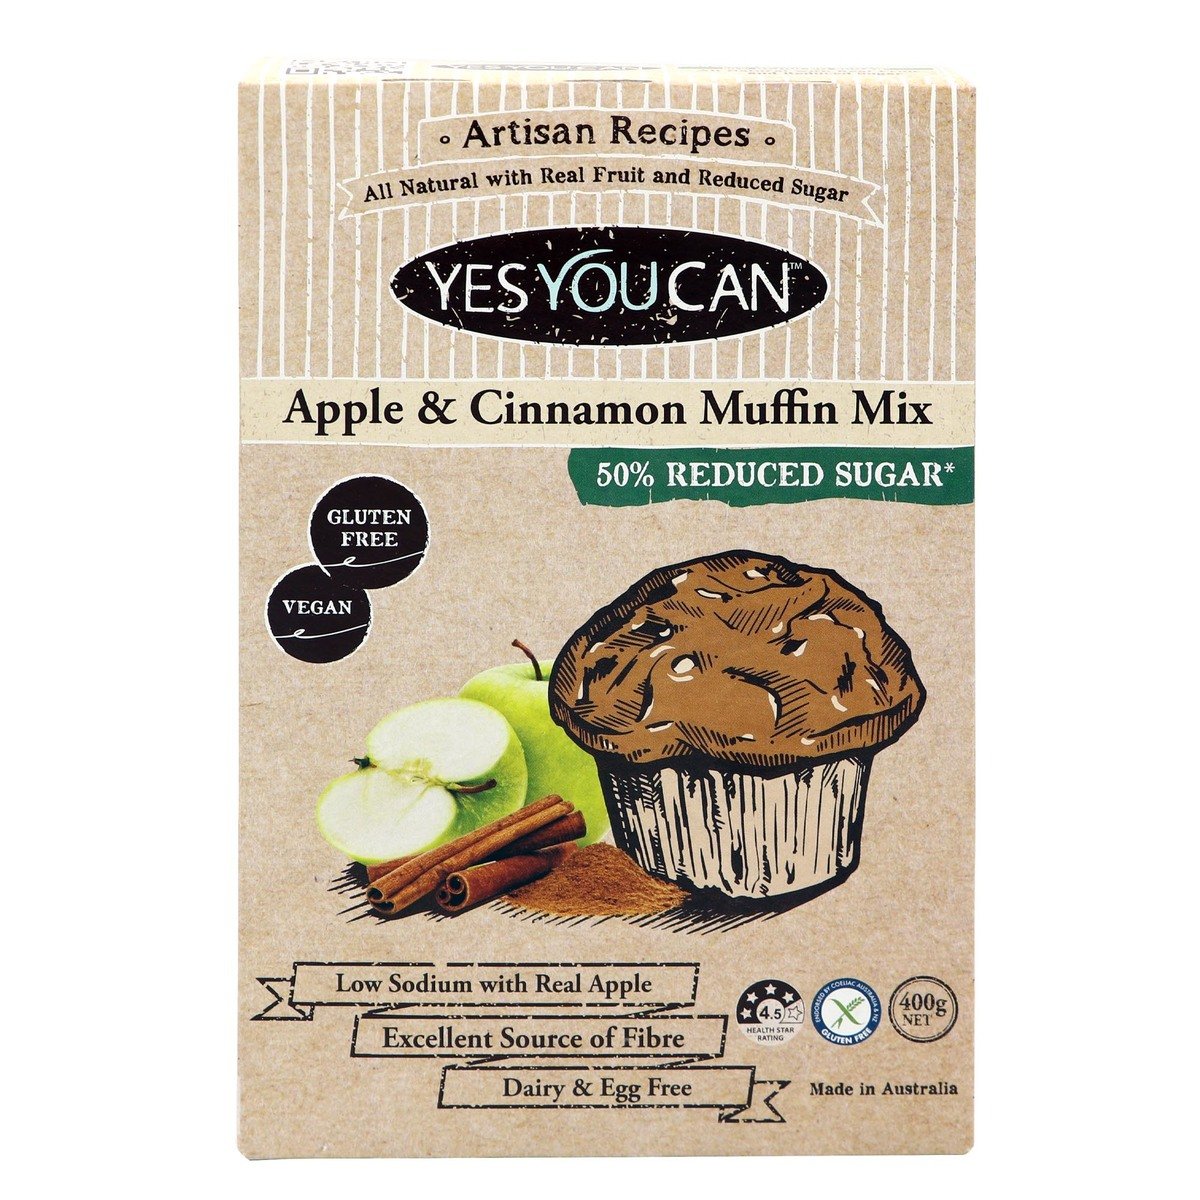 Yes You Can Apple & Cinnamon Muffin Mix 400g